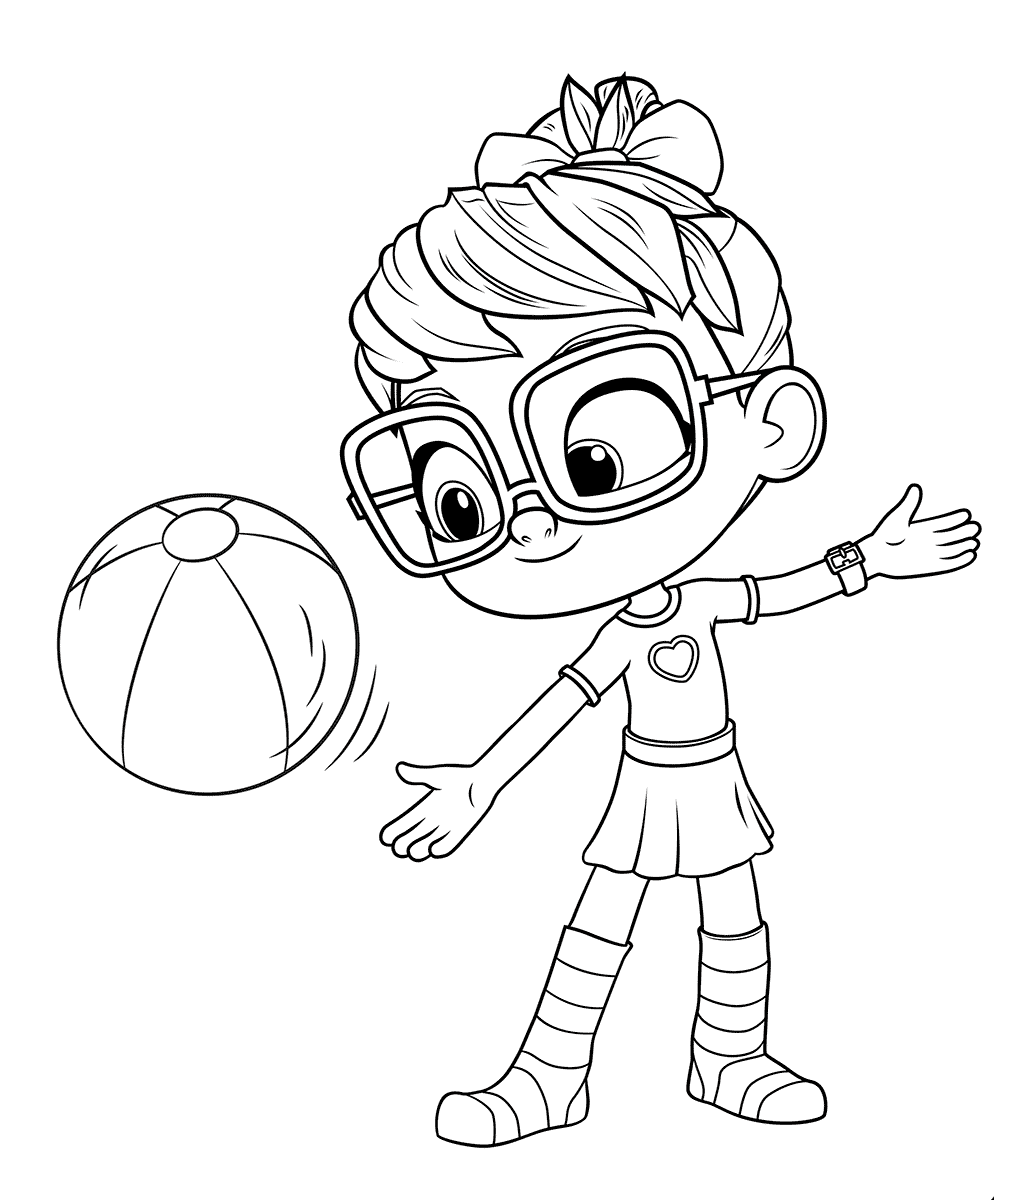 Printable Abby Hatcher Coloring Pages Pdf For Kids - Abby Hatcher Coloring Pages Printable